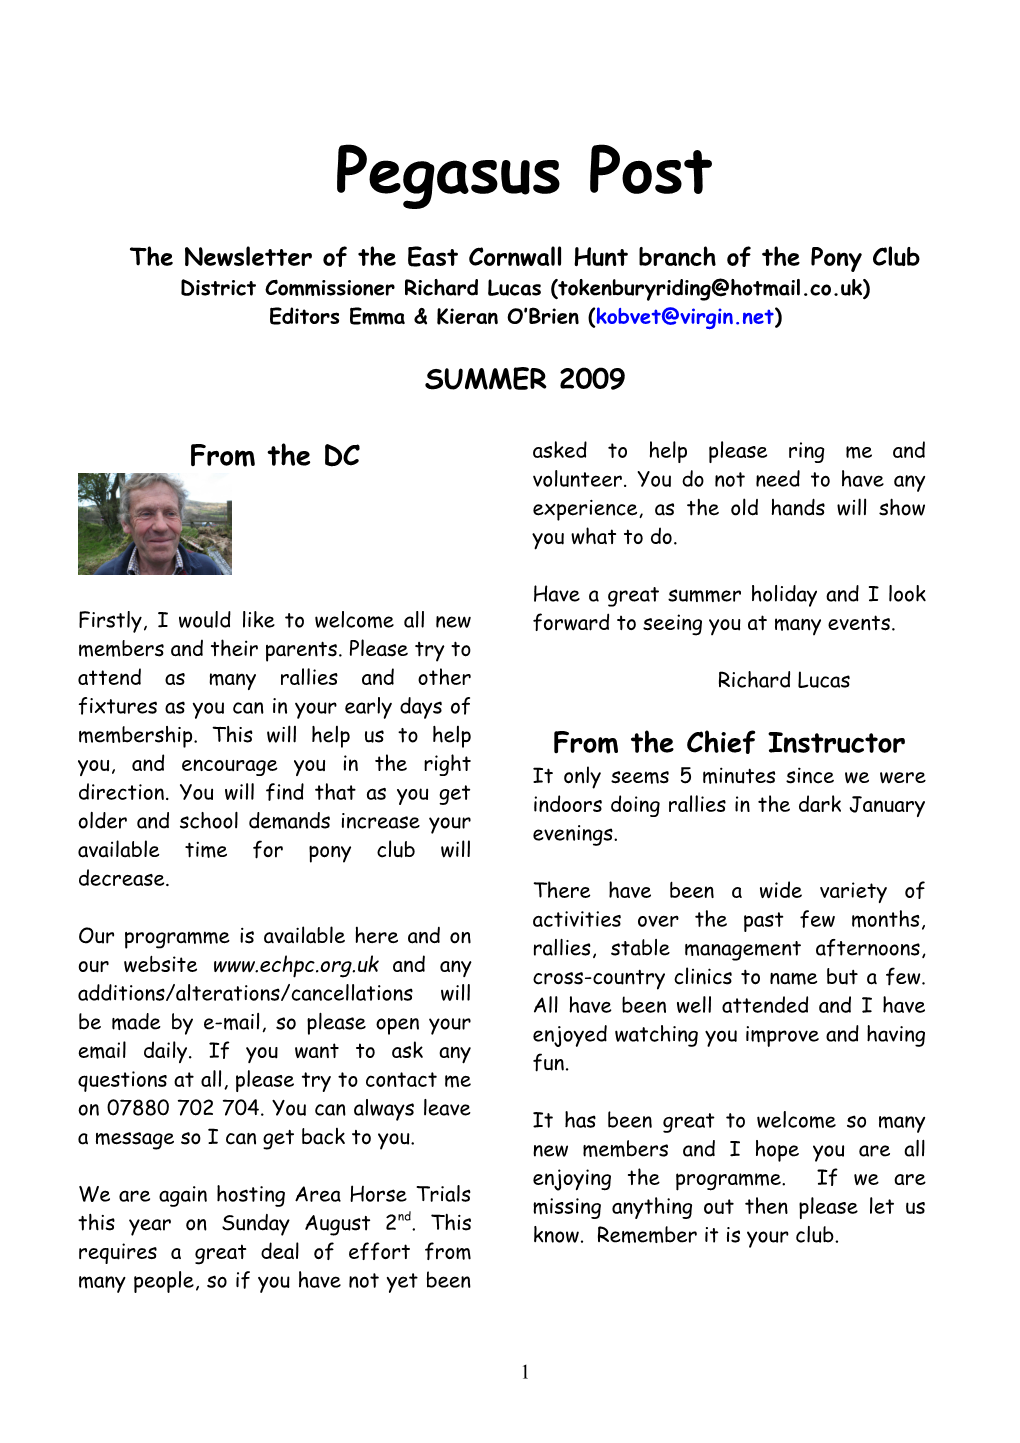 The Newsletter of the East Cornwall Hunt Branch of the Pony Club